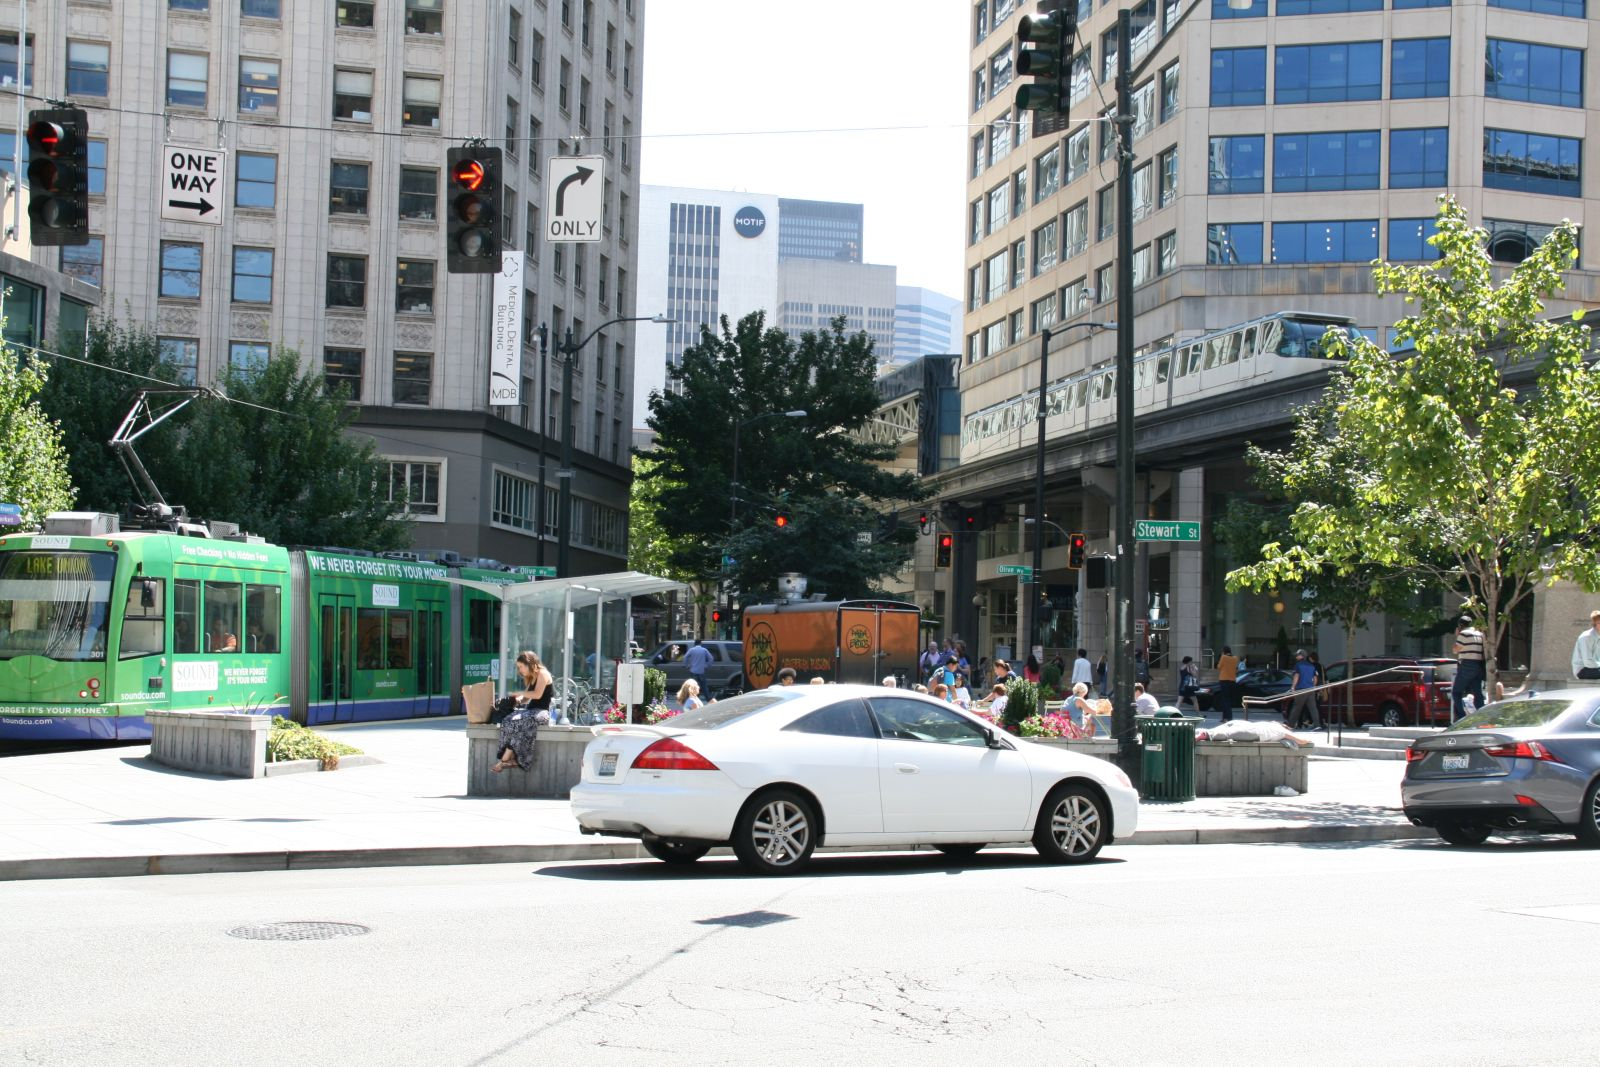 The Seattle Monorail, with the more pedestrian and automobile friendly South Lake Union Streetcar. Photo by Jeramey Jannene.